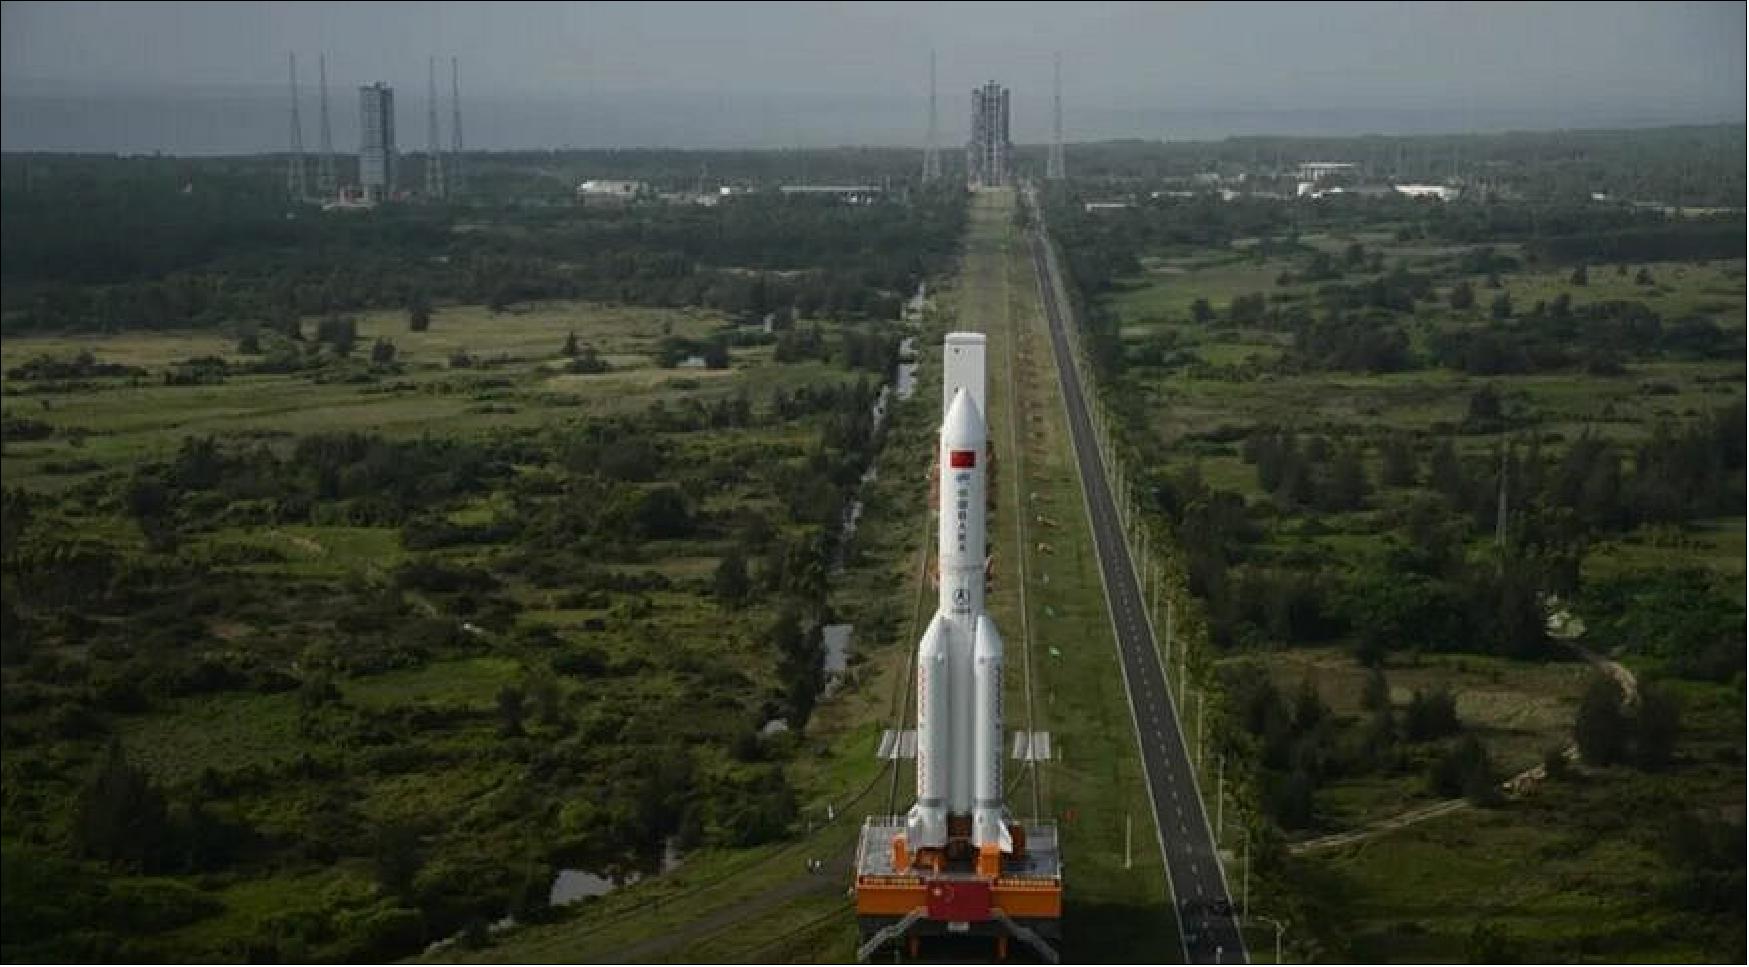 Figure 8: Rollout of the first Long March 5B to the pad at Wenchang, South China in April 2020 (image credit: CASC)